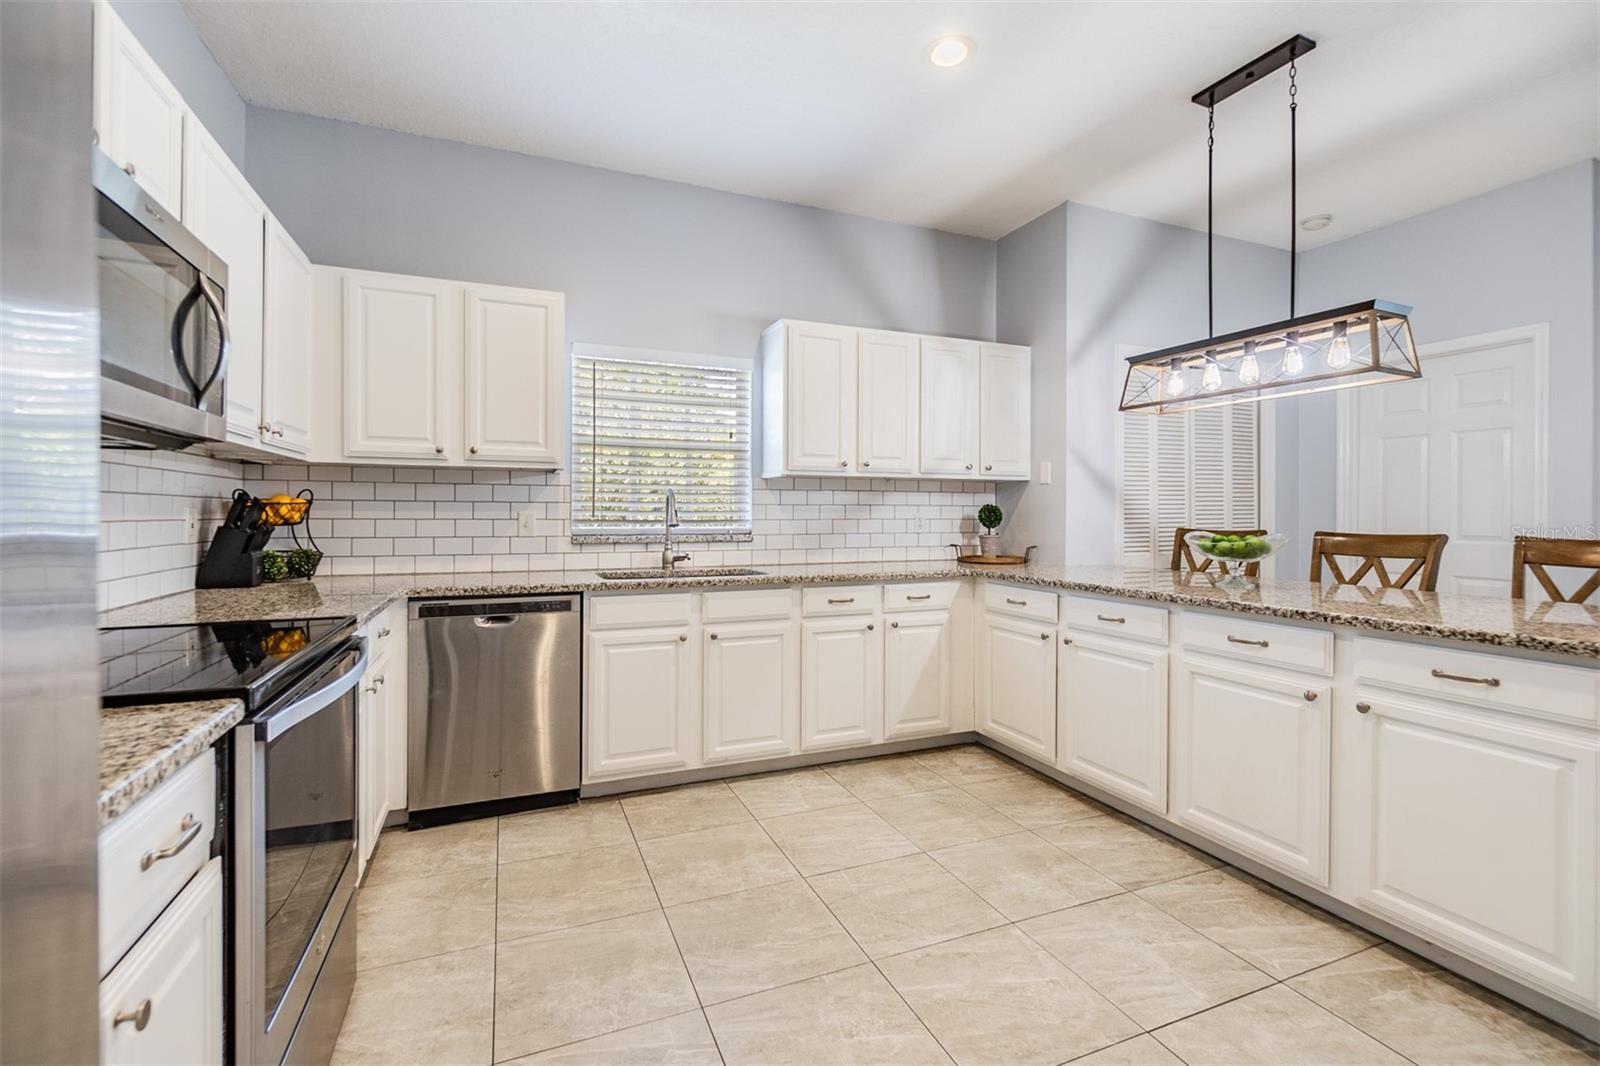 Large and Open kitchen with new light fixture, Subway tile backsplash, Granite Countertops, and Stainless Steel appliances.